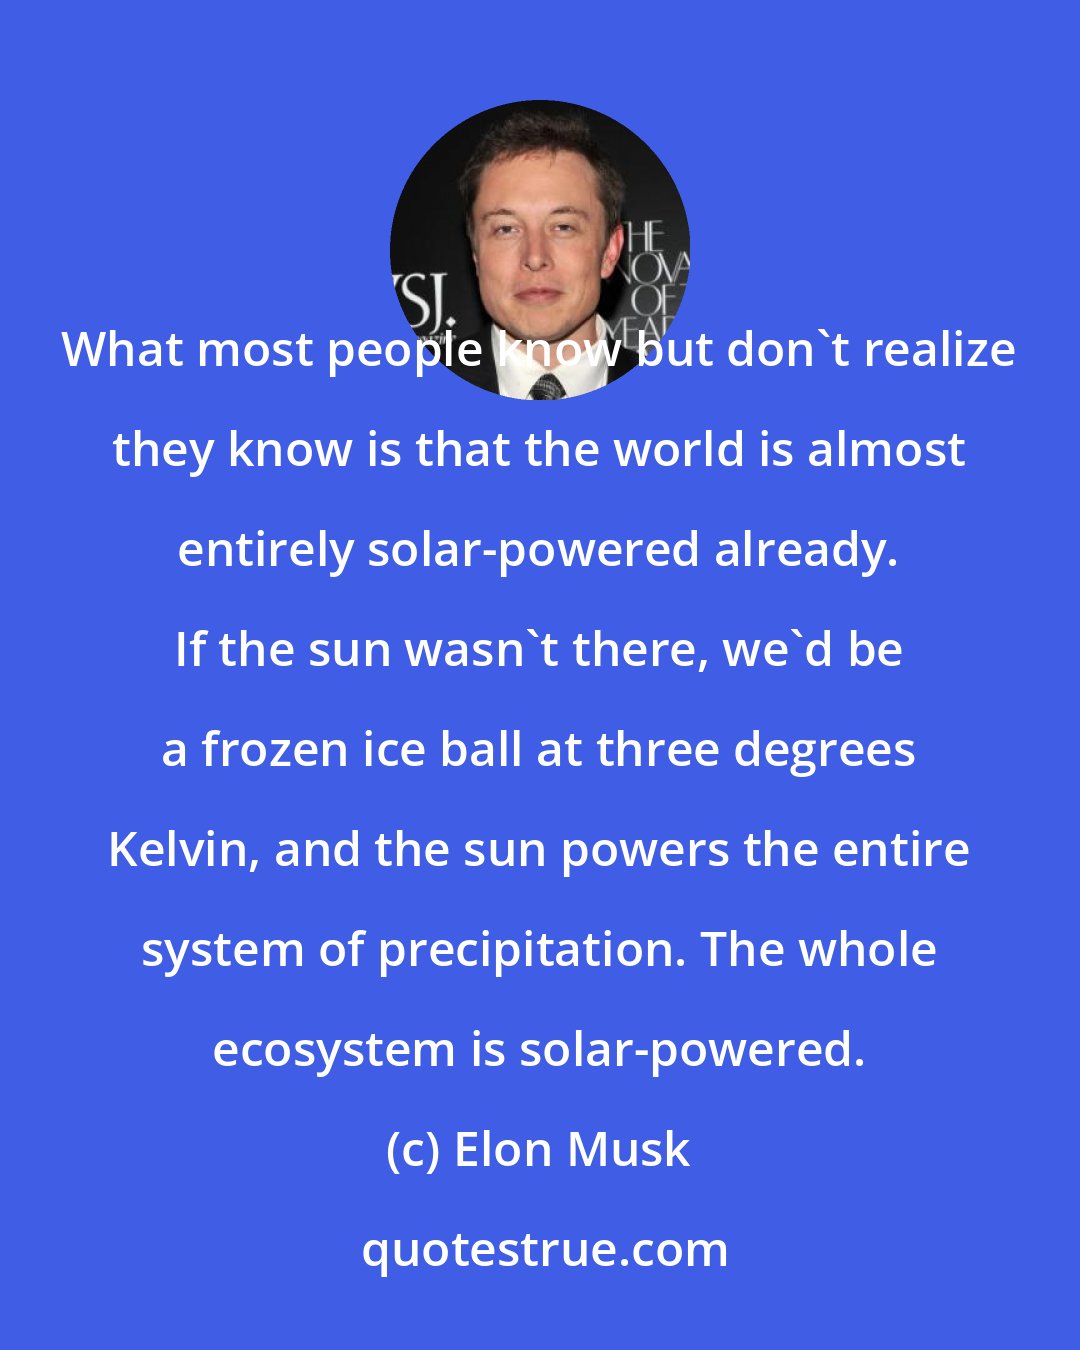 Elon Musk: What most people know but don't realize they know is that the world is almost entirely solar-powered already. If the sun wasn't there, we'd be a frozen ice ball at three degrees Kelvin, and the sun powers the entire system of precipitation. The whole ecosystem is solar-powered.